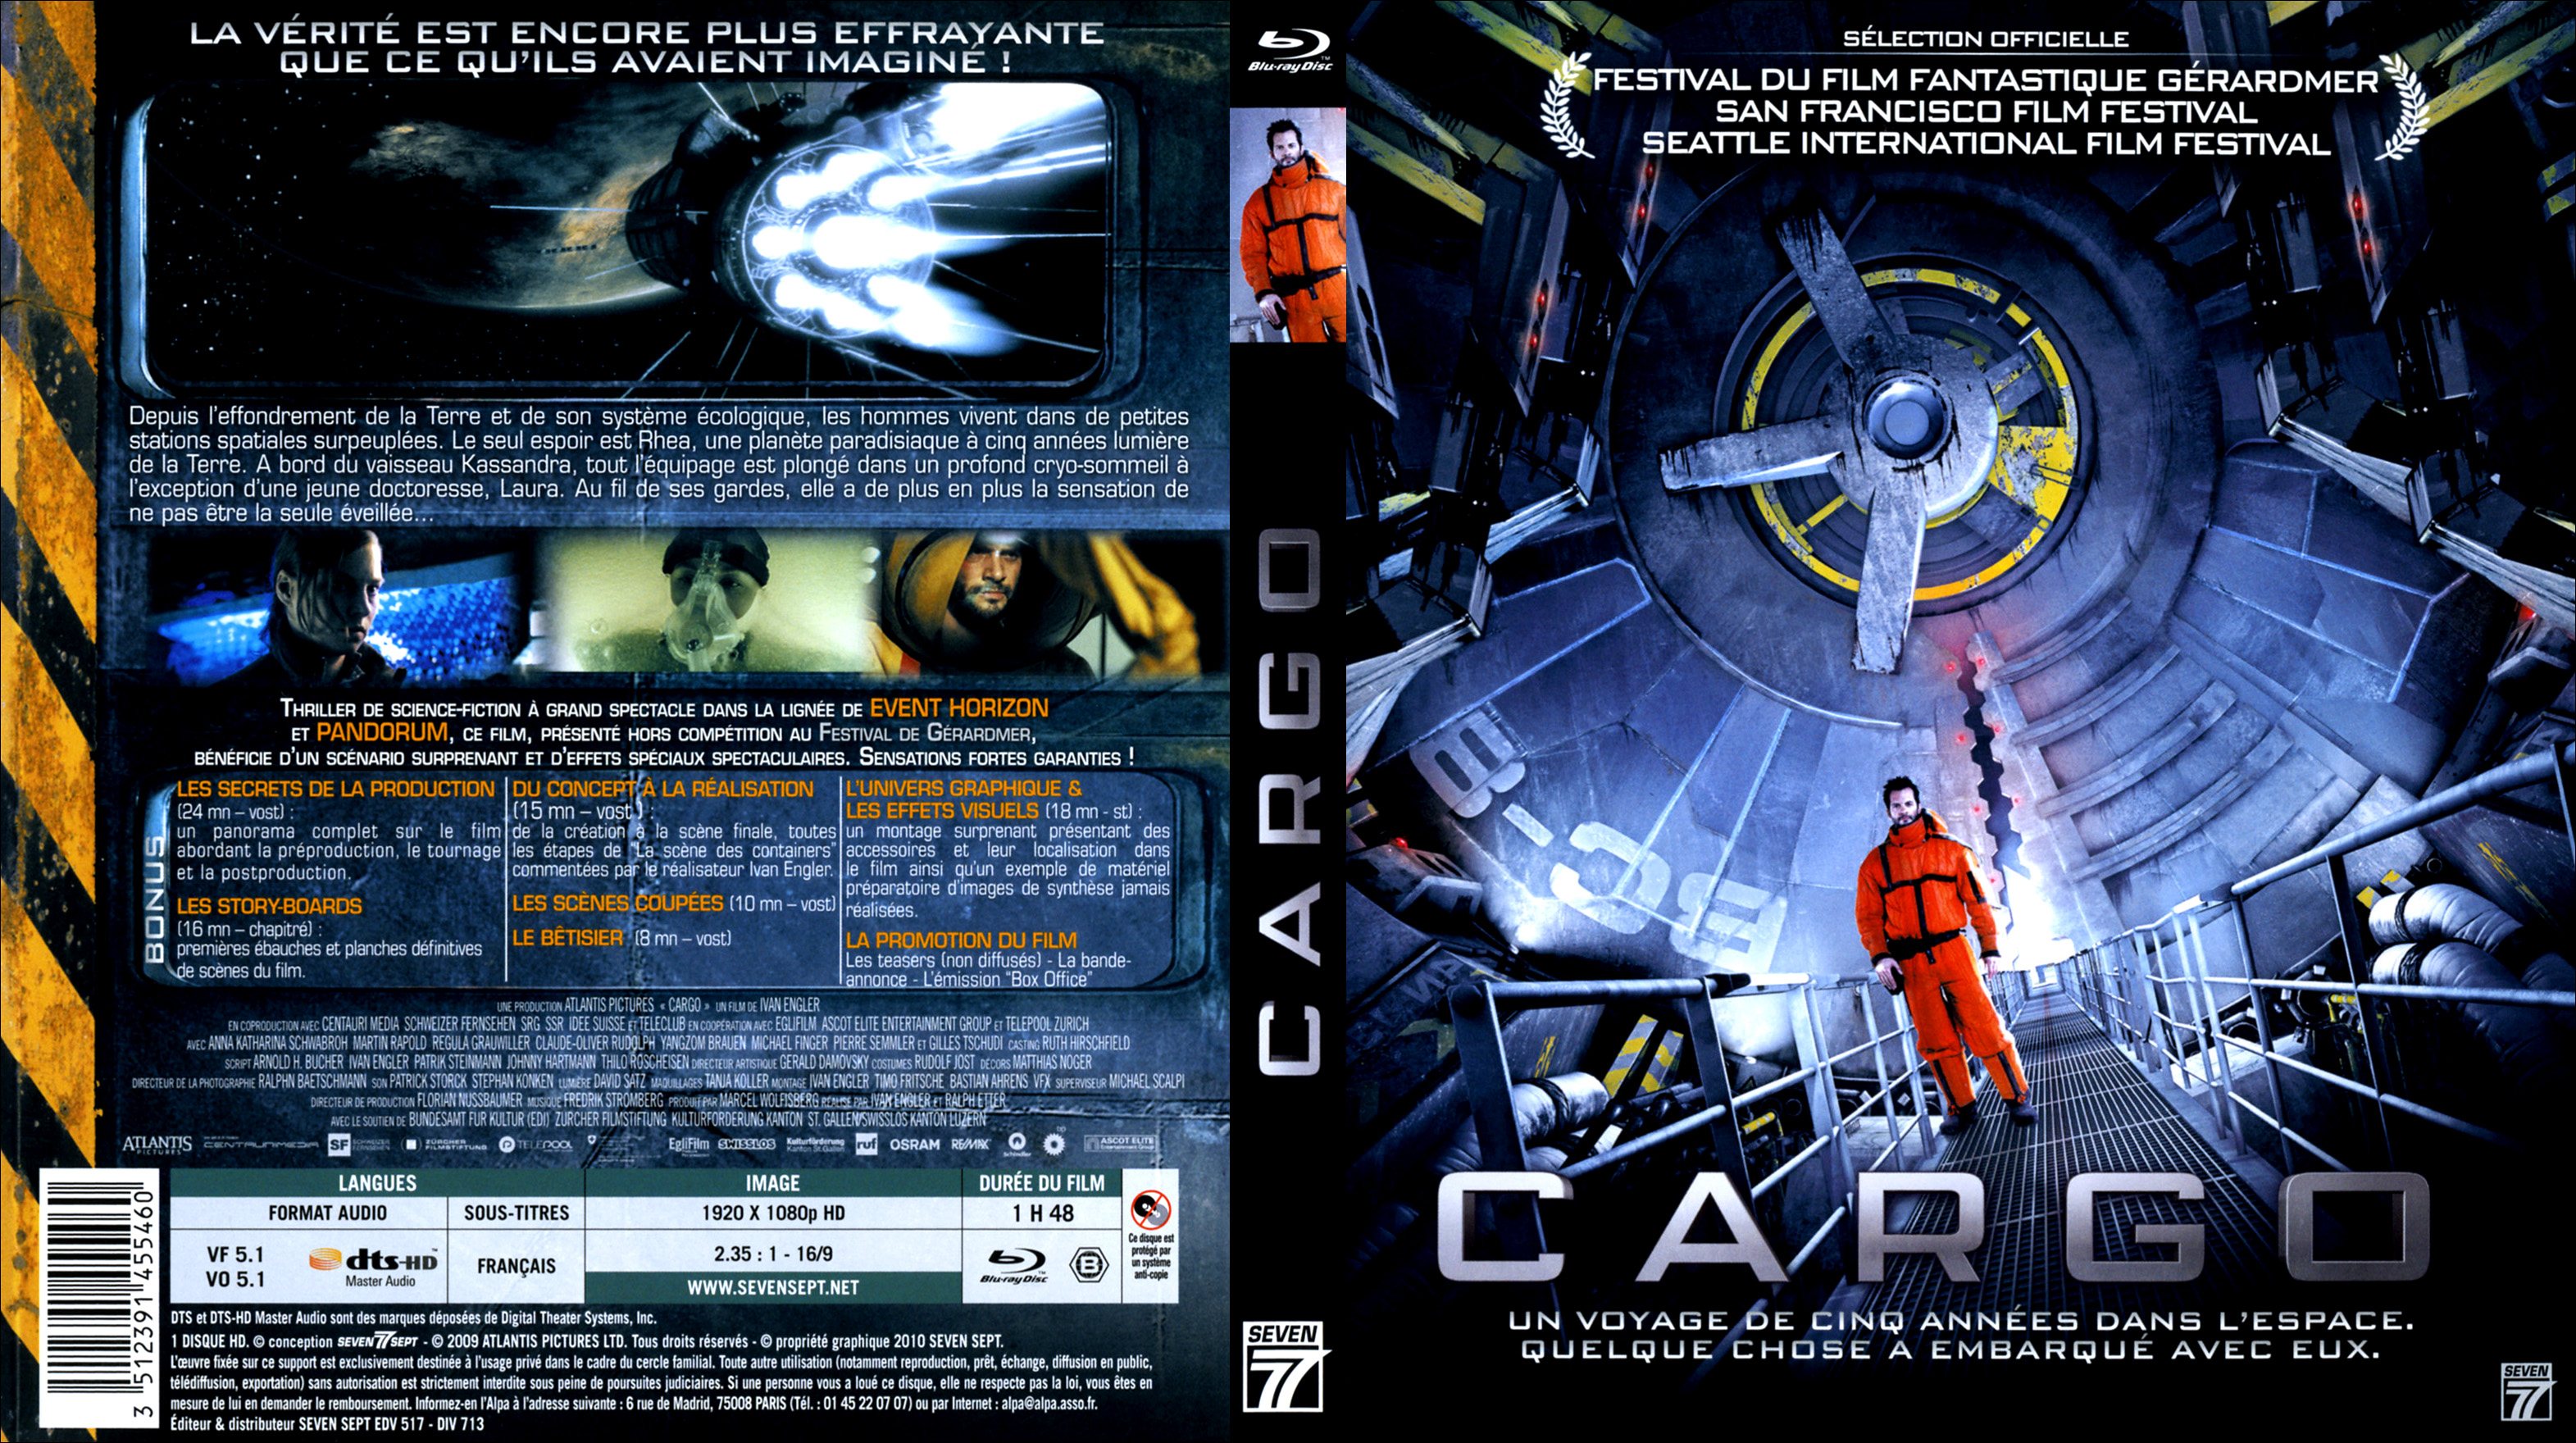 Jaquette DVD Cargo (BLU-RAY)